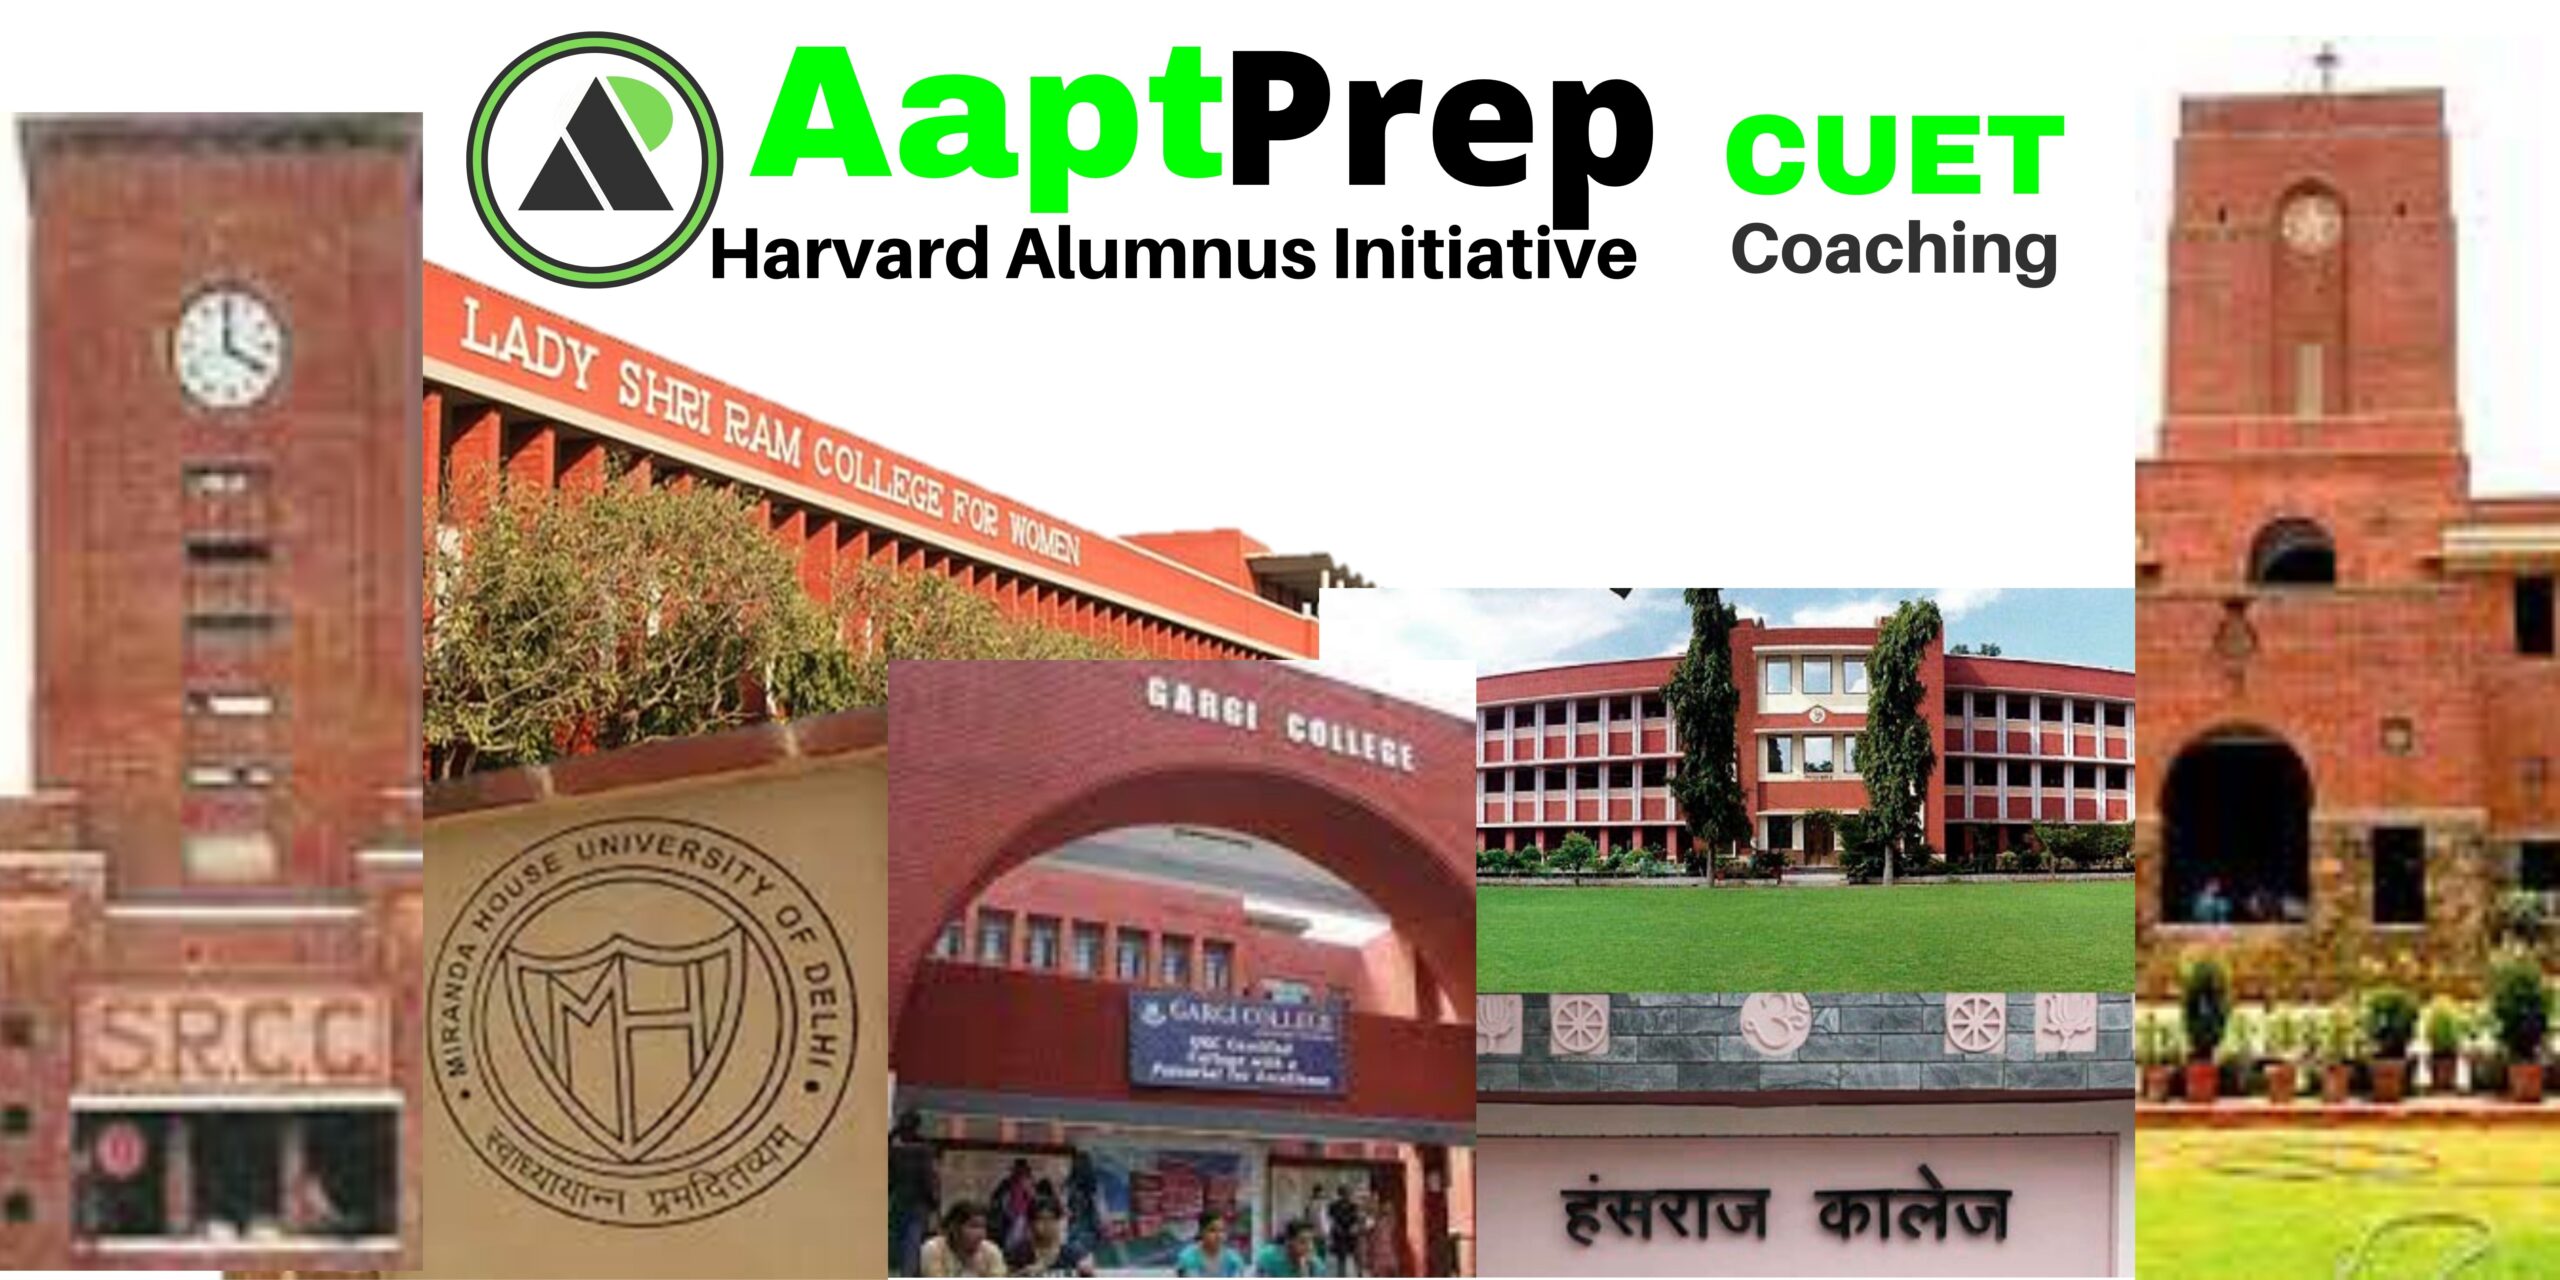 India's no. 1 CUET coaching Institute offering all 27 domain subjects along with English & GAT. Highly experienced faculty from Harvard & IIM.
cuet Coaching
cuet Coaching has a significant impact on how the candidate performs in the entrance test. Experienced guidance and pedagogy are required for clearing the cuet examination with merit. One can miss out on the current and firsthand knowledge if opted for self-study. It matters where the cuet Coaching is taken from, which defines the final examination rank. Coaching helps the cuet aspirants to have regular revisions and professional counselling from experts in the field. The candidates have a better chance of cracking the examination if they are receiving advice from accomplished tutors.
Why go for online cuet Coaching?
With the inception of the internet, the education industry has also taken up a boom. The shift has proven beneficial to provide better education quality for the students through the online mode. So, online cuet coaching is a well-advanced and effective option for students who want to rank better in the entrance examination.
Benefits of Online Coaching
Candidates can cut the cost and hassle of travelling to various coaching institutes
Candidates can choose to attend the classes at their convenience due to the 24/7 accessibility of the study material
If the candidates miss out on live lectures by the faculty, they are recorded and uploaded for the aspirants
Experienced faculty is available 24/7 to clear the doubts of the students on the social media

Features of cuet Coaching
Suppose the candidate chooses professional online cuet coaching. In that case, he/she has access to expert assistance at all times. They would have the convenience to create their timetable according to their daily routine. cuet coaching is advantageous as students have access to experienced faculty and competitive study material. The student is not bound to be physically present in the classes; they can have the study material as required. This process gives more confidence to the aspirants of cuet 2022 as they have the freedom to prepare according to their schedule.
NLAT
Candidates get their hands on the live lectures, mock tests, sample papers, and previous years question papers all in one place
They get access to e-books that are written by the experts and question papers with the answer keys to have rigorous practice for cuet 2022
The professors will be available to solve the queries through social media channels
The candidates will get a detailed analysis from the experts on how to crack cuet 2022 through an online medium with ease
cuet Coaching is quite constructive and productive for aspirants appearing for cuet 2022. To better understand the exam pattern and other details, you can visit the official website cuet.samarth.ac.in. 
CUET Coaching in Agartala
 
CUET Coaching in Ahmedabad
 
CUET Coaching in Allahabad
 
CUET Coaching in Amravati
 
CUET Coaching in Aurangabad
 
CUET Coaching in Bangalore
 
CUET Coaching in Bareilly
 
CUET Coaching in Baroda
 
CUET Coaching in Belgaum
 
CUET Coaching in Berhampur
 
CUET Coaching in Bhagalpur
 
CUET Coaching in Bhilai
 
CUET Coaching in Bhilwara
 
CUET Coaching in Bhopal
 
CUET Coaching in Bhubaneswar
 
CUET Coaching in Bilaspur
 
CUET Coaching in Chandigarh
 
CUET Coaching in Chennai
 
CUET Coaching in Chhindwara
 
CUET Coaching in Cochin
 
CUET Coaching in Coimbatore
 
CUET Coaching in Cuttack
 
CUET Coaching in Dehradun
 
CUET Coaching in Delhi
 
CUET Coaching in Dharwad
 
CUET Coaching in Erode
 
CUET Coaching in Gandhinagar
 
CUET Coaching in Gorakhpur
 
CUET Coaching in Greater Noida
 
CUET Coaching in Guntur
 
CUET Coaching in Gurgaon
 
CUET Coaching in Guwahati
 
CUET Coaching in Gwalior
 
CUET Coaching in Haldwani
 
CUET Coaching in Hisar
 
CUET Coaching in Hubli
 
CUET Coaching in Hyderabad
 
CUET Coaching in Indore
 
CUET Coaching in Jabalpur
 
CUET Coaching in Jaipur
 
CUET Coaching in Jalandhar
 
CUET Coaching in Jalgaon
 
CUET Coaching in Jammu
 
CUET Coaching in Jamshedpur
 
CUET Coaching in Jodhpur
 
CUET Coaching in Kakinada
 
CUET Coaching in Kannur
 
CUET Coaching in Kanpur
 
CUET Coaching in Karur
 
CUET Coaching in Kolhapur
 
CUET Coaching in Kolkata
 
CUET Coaching in Kollam
 
CUET Coaching in Kota
 
CUET Coaching in Kozhikode
 
CUET Coaching in Lucknow
 
CUET Coaching in Madurai
 
CUET Coaching in Mangalore
 
CUET Coaching in Meerut
 
CUET Coaching in Moradabad
 
CUET Coaching in Mumbai
 
CUET Coaching in Muvattupuzha
 
CUET Coaching in Mysore
 
CUET Coaching in Nagpur
 
CUET Coaching in Nashik
 
CUET Coaching in Ongole
 
CUET Coaching in Panipat
 
CUET Coaching in Patna
 
CUET Coaching in Pondicherry
 
CUET Coaching in Prayagraj
 
CUET Coaching in Pune
 
CUET Coaching in Raipur
 
CUET Coaching in Rajahmundry
 
CUET Coaching in Ranchi
 
CUET Coaching in Rohtak
 
CUET Coaching in Rourkela
 
CUET Coaching in Sambalpur
 
CUET Coaching in Solapur
 
CUET Coaching in Surat
 
CUET Coaching in Trichur
 
CUET Coaching in Trichy
 
CUET Coaching in Trivandrum
 
CUET Coaching in Udaipur
 
CUET Coaching in Udupi
 
CUET Coaching in Varanasi
 
CUET Coaching in Vijayawada
 
CUET Coaching in Vizag
 
CUET Coaching in Warangal
CUET 2023 Exam
CUET 2023 Latest Update
CUET 2023 Notification
CUET 2023 Exam Summary
CUET 2023 Exam Date 
CUET 2023 Application Form 
CUET 2023 Application Fee
CUET 2023 Eligibility Criteria
CUET 2023 Exam Pattern
CUET 2023 Syllabus
CUET Colleges
CUET 2023 Exam Centers
CUET 2023 Admit Card 
CUET 2023 Answer Key 
CUET 2023 Result
CUET 2023 Cut Off
CUET 2023 Counselling
CUET 2024 Exam
CUET 2024 Latest Update
CUET 2024 Notification
CUET 2024 Exam Summary
CUET 2024 Exam Date 
CUET 2024 Application Form 
CUET 2024 Application Fee
CUET 2024 Eligibility Criteria
CUET 2024 Exam Pattern
CUET 2024 Syllabus
CUET Colleges
CUET 2024 Exam Centers
CUET 2024 Admit Card 
CUET 2024 Answer Key 
CUET 2024 Result
CUET 2024 Cut Off
CUET 2024 Counselling
CUET 2022 Exam
CUET 2022 Latest Update
CUET 2022 Notification
CUET 2022 Exam Summary
CUET 2022 Exam Date 
CUET 2022 Application Form 
CUET 2022 Application Fee
CUET 2022 Eligibility Criteria
CUET 2022 Exam Pattern
CUET 2022 Syllabus
CUET Colleges
CUET 2022 Exam Centers
CUET 2022 Admit Card 
CUET 2022 Answer Key 
CUET 2022 Result
CUET 2022 Cut Off
CUET 2022 Counselling
CUET 2023 Exam
CUET 2023 Latest Update
CUET 2023 Notification
CUET 2023 Exam Summary
CUET 2023 Exam Date 
CUET 2023 Application Form 
CUET 2023 Application Fee
CUET 2023 Eligibility Criteria
CUET 2023 Exam Pattern
CUET 2023 Syllabus
CUET Colleges
CUET 2023 Exam Centers
CUET 2023 Admit Card 
CUET 2023 Answer Key 
CUET 2023 Result
CUET 2023 Cut Off
CUET 2023 Counselling
CUET 2024 Exam
CUET 2024 Latest Update
CUET 2024 Notification
CUET 2024 Exam Summary
CUET 2024 Exam Date 
CUET 2024 Application Form 
CUET 2024 Application Fee
CUET 2024 Eligibility Criteria
CUET 2024 Exam Pattern
CUET 2024 Syllabus
CUET Colleges
CUET 2024 Exam Centers
CUET 2024 Admit Card 
CUET 2024 Answer Key 
CUET 2024 Result
CUET 2024 Cut Off
CUET 2024 Counselling
CUET 2022 Exam
CUET 2022 Latest Update
CUET 2022 Notification
CUET 2022 Exam Summary
CUET 2022 Exam Date 
CUET 2022 Application Form 
CUET 2022 Application Fee
CUET 2022 Eligibility Criteria
CUET 2022 Exam Pattern
CUET 2022 Syllabus
CUET Colleges
CUET 2022 Exam Centers
CUET 2022 Admit Card 
CUET 2022 Answer Key 
CUET 2022 Result
CUET 2022 Cut Off
CUET 2022 Counselling
CUET 2023 Exam
CUET 2023 Latest Update
CUET 2023 Notification
CUET 2023 Exam Summary
CUET 2023 Exam Date 
CUET 2023 Application Form 
CUET 2023 Application Fee
CUET 2023 Eligibility Criteria
CUET 2023 Exam Pattern
CUET 2023 Syllabus
CUET Colleges
CUET 2023 Exam Centers
CUET 2023 Admit Card 
CUET 2023 Answer Key 
CUET 2023 Result
CUET 2023 Cut Off
CUET 2023 Counselling
CUET 2024 Exam
CUET 2024 Latest Update
CUET 2024 Notification
CUET 2024 Exam Summary
CUET 2024 Exam Date 
CUET 2024 Application Form 
CUET 2024 Application Fee
CUET 2024 Eligibility Criteria
CUET 2024 Exam Pattern
CUET 2024 Syllabus
CUET Colleges
CUET 2024 Exam Centers
CUET 2024 Admit Card 
CUET 2024 Answer Key 
CUET 2024 Result
CUET 2024 Cut Off
CUET 2024 Counselling
CUET 2022 Exam
CUET 2022 Latest Update
CUET 2022 Notification
CUET 2022 Exam Summary
CUET 2022 Exam Date 
CUET 2022 Application Form 
CUET 2022 Application Fee
CUET 2022 Eligibility Criteria
CUET 2022 Exam Pattern
CUET 2022 Syllabus
CUET Colleges
CUET 2022 Exam Centers
CUET 2022 Admit Card 
CUET 2022 Answer Key 
CUET 2022 Result
CUET 2022 Cut Off
CUET 2022 Counselling
CUET 2023 Exam
CUET 2023 Latest Update
CUET 2023 Notification
CUET 2023 Exam Summary
CUET 2023 Exam Date 
CUET 2023 Application Form 
CUET 2023 Application Fee
CUET 2023 Eligibility Criteria
CUET 2023 Exam Pattern
CUET 2023 Syllabus
CUET Colleges
CUET 2023 Exam Centers
CUET 2023 Admit Card 
CUET 2023 Answer Key 
CUET 2023 Result
CUET 2023 Cut Off
CUET 2023 Counselling
CUET 2024 Exam
CUET 2024 Latest Update
CUET 2024 Notification
CUET 2024 Exam Summary
CUET 2024 Exam Date 
CUET 2024 Application Form 
CUET 2024 Application Fee
CUET 2024 Eligibility Criteria
CUET 2024 Exam Pattern
CUET 2024 Syllabus
CUET Colleges
CUET 2024 Exam Centers
CUET 2024 Admit Card 
CUET 2024 Answer Key 
CUET 2024 Result
CUET 2024 Cut Off
CUET 2024 Counselling
CUET 2022 Exam
CUET 2022 Latest Update
CUET 2022 Notification
CUET 2022 Exam Summary
CUET 2022 Exam Date 
CUET 2022 Application Form 
CUET 2022 Application Fee
CUET 2022 Eligibility Criteria
CUET 2022 Exam Pattern
CUET 2022 Syllabus
CUET Colleges
CUET 2022 Exam Centers
CUET 2022 Admit Card 
CUET 2022 Answer Key 
CUET 2022 Result
CUET 2022 Cut Off
CUET 2022 Counselling

India's no. 1 CUET coaching Institute offering all 27 domain subjects along with English & GAT. Highly experienced faculty from Harvard & IIM.
cuet Coaching
cuet Coaching has a significant impact on how the candidate performs in the entrance test. Experienced guidance and pedagogy are required for clearing the cuet examination with merit. One can miss out on the current and firsthand knowledge if opted for self-study. It matters where the cuet Coaching is taken from, which defines the final examination rank. Coaching helps the cuet aspirants to have regular revisions and professional counselling from experts in the field. The candidates have a better chance of cracking the examination if they are receiving advice from accomplished tutors.
Why go for online cuet Coaching?
With the inception of the internet, the education industry has also taken up a boom. The shift has proven beneficial to provide better education quality for the students through the online mode. So, online cuet coaching is a well-advanced and effective option for students who want to rank better in the entrance examination.
Benefits of Online Coaching
Candidates can cut the cost and hassle of travelling to various coaching institutes
Candidates can choose to attend the classes at their convenience due to the 24/7 accessibility of the study material
If the candidates miss out on live lectures by the faculty, they are recorded and uploaded for the aspirants
Experienced faculty is available 24/7 to clear the doubts of the students on the social media

Features of cuet Coaching
Suppose the candidate chooses professional online cuet coaching. In that case, he/she has access to expert assistance at all times. They would have the convenience to create their timetable according to their daily routine. cuet coaching is advantageous as students have access to experienced faculty and competitive study material. The student is not bound to be physically present in the classes; they can have the study material as required. This process gives more confidence to the aspirants of cuet 2022 as they have the freedom to prepare according to their schedule.
NLAT
Candidates get their hands on the live lectures, mock tests, sample papers, and previous years question papers all in one place
They get access to e-books that are written by the experts and question papers with the answer keys to have rigorous practice for cuet 2022
The professors will be available to solve the queries through social media channels
The candidates will get a detailed analysis from the experts on how to crack cuet 2022 through an online medium with ease
cuet Coaching is quite constructive and productive for aspirants appearing for cuet 2022. To better understand the exam pattern and other details, you can visit the official website cuet.samarth.ac.in. 
CUET Coaching in Agartala
 
CUET Coaching in Ahmedabad
 
CUET Coaching in Allahabad
 
CUET Coaching in Amravati
 
CUET Coaching in Aurangabad
 
CUET Coaching in Bangalore
 
CUET Coaching in Bareilly
 
CUET Coaching in Baroda
 
CUET Coaching in Belgaum
 
CUET Coaching in Berhampur
 
CUET Coaching in Bhagalpur
 
CUET Coaching in Bhilai
 
CUET Coaching in Bhilwara
 
CUET Coaching in Bhopal
 
CUET Coaching in Bhubaneswar
 
CUET Coaching in Bilaspur
 
CUET Coaching in Chandigarh
 
CUET Coaching in Chennai
 
CUET Coaching in Chhindwara
 
CUET Coaching in Cochin
 
CUET Coaching in Coimbatore
 
CUET Coaching in Cuttack
 
CUET Coaching in Dehradun
 
CUET Coaching in Delhi
 
CUET Coaching in Dharwad
 
CUET Coaching in Erode
 
CUET Coaching in Gandhinagar
 
CUET Coaching in Gorakhpur
 
CUET Coaching in Greater Noida
 
CUET Coaching in Guntur
 
CUET Coaching in Gurgaon
 
CUET Coaching in Guwahati
 
CUET Coaching in Gwalior
 
CUET Coaching in Haldwani
 
CUET Coaching in Hisar
 
CUET Coaching in Hubli
 
CUET Coaching in Hyderabad
 
CUET Coaching in Indore
 
CUET Coaching in Jabalpur
 
CUET Coaching in Jaipur
 
CUET Coaching in Jalandhar
 
CUET Coaching in Jalgaon
 
CUET Coaching in Jammu
 
CUET Coaching in Jamshedpur
 
CUET Coaching in Jodhpur
 
CUET Coaching in Kakinada
 
CUET Coaching in Kannur
 
CUET Coaching in Kanpur
 
CUET Coaching in Karur
 
CUET Coaching in Kolhapur
 
CUET Coaching in Kolkata
 
CUET Coaching in Kollam
 
CUET Coaching in Kota
 
CUET Coaching in Kozhikode
 
CUET Coaching in Lucknow
 
CUET Coaching in Madurai
 
CUET Coaching in Mangalore
 
CUET Coaching in Meerut
 
CUET Coaching in Moradabad
 
CUET Coaching in Mumbai
 
CUET Coaching in Muvattupuzha
 
CUET Coaching in Mysore
 
CUET Coaching in Nagpur
 
CUET Coaching in Nashik
 
CUET Coaching in Ongole
 
CUET Coaching in Panipat
 
CUET Coaching in Patna
 
CUET Coaching in Pondicherry
 
CUET Coaching in Prayagraj
 
CUET Coaching in Pune
 
CUET Coaching in Raipur
 
CUET Coaching in Rajahmundry
 
CUET Coaching in Ranchi
 
CUET Coaching in Rohtak
 
CUET Coaching in Rourkela
 
CUET Coaching in Sambalpur
 
CUET Coaching in Solapur
 
CUET Coaching in Surat
 
CUET Coaching in Trichur
 
CUET Coaching in Trichy
 
CUET Coaching in Trivandrum
 
CUET Coaching in Udaipur
 
CUET Coaching in Udupi
 
CUET Coaching in Varanasi
 
CUET Coaching in Vijayawada
 
CUET Coaching in Vizag
 
CUET Coaching in Warangal
CUET 2023 Exam
CUET 2023 Latest Update
CUET 2023 Notification
CUET 2023 Exam Summary
CUET 2023 Exam Date 
CUET 2023 Application Form 
CUET 2023 Application Fee
CUET 2023 Eligibility Criteria
CUET 2023 Exam Pattern
CUET 2023 Syllabus
CUET Colleges
CUET 2023 Exam Centers
CUET 2023 Admit Card 
CUET 2023 Answer Key 
CUET 2023 Result
CUET 2023 Cut Off
CUET 2023 Counselling
CUET 2024 Exam
CUET 2024 Latest Update
CUET 2024 Notification
CUET 2024 Exam Summary
CUET 2024 Exam Date 
CUET 2024 Application Form 
CUET 2024 Application Fee
CUET 2024 Eligibility Criteria
CUET 2024 Exam Pattern
CUET 2024 Syllabus
CUET Colleges
CUET 2024 Exam Centers
CUET 2024 Admit Card 
CUET 2024 Answer Key 
CUET 2024 Result
CUET 2024 Cut Off
CUET 2024 Counselling
CUET 2022 Exam
CUET 2022 Latest Update
CUET 2022 Notification
CUET 2022 Exam Summary
CUET 2022 Exam Date 
CUET 2022 Application Form 
CUET 2022 Application Fee
CUET 2022 Eligibility Criteria
CUET 2022 Exam Pattern
CUET 2022 Syllabus
CUET Colleges
CUET 2022 Exam Centers
CUET 2022 Admit Card 
CUET 2022 Answer Key 
CUET 2022 Result
CUET 2022 Cut Off
CUET 2022 Counselling
CUET 2023 Exam
CUET 2023 Latest Update
CUET 2023 Notification
CUET 2023 Exam Summary
CUET 2023 Exam Date 
CUET 2023 Application Form 
CUET 2023 Application Fee
CUET 2023 Eligibility Criteria
CUET 2023 Exam Pattern
CUET 2023 Syllabus
CUET Colleges
CUET 2023 Exam Centers
CUET 2023 Admit Card 
CUET 2023 Answer Key 
CUET 2023 Result
CUET 2023 Cut Off
CUET 2023 Counselling
CUET 2024 Exam
CUET 2024 Latest Update
CUET 2024 Notification
CUET 2024 Exam Summary
CUET 2024 Exam Date 
CUET 2024 Application Form 
CUET 2024 Application Fee
CUET 2024 Eligibility Criteria
CUET 2024 Exam Pattern
CUET 2024 Syllabus
CUET Colleges
CUET 2024 Exam Centers
CUET 2024 Admit Card 
CUET 2024 Answer Key 
CUET 2024 Result
CUET 2024 Cut Off
CUET 2024 Counselling
CUET 2022 Exam
CUET 2022 Latest Update
CUET 2022 Notification
CUET 2022 Exam Summary
CUET 2022 Exam Date 
CUET 2022 Application Form 
CUET 2022 Application Fee
CUET 2022 Eligibility Criteria
CUET 2022 Exam Pattern
CUET 2022 Syllabus
CUET Colleges
CUET 2022 Exam Centers
CUET 2022 Admit Card 
CUET 2022 Answer Key 
CUET 2022 Result
CUET 2022 Cut Off
CUET 2022 Counselling
CUET 2023 Exam
CUET 2023 Latest Update
CUET 2023 Notification
CUET 2023 Exam Summary
CUET 2023 Exam Date 
CUET 2023 Application Form 
CUET 2023 Application Fee
CUET 2023 Eligibility Criteria
CUET 2023 Exam Pattern
CUET 2023 Syllabus
CUET Colleges
CUET 2023 Exam Centers
CUET 2023 Admit Card 
CUET 2023 Answer Key 
CUET 2023 Result
CUET 2023 Cut Off
CUET 2023 Counselling
CUET 2024 Exam
CUET 2024 Latest Update
CUET 2024 Notification
CUET 2024 Exam Summary
CUET 2024 Exam Date 
CUET 2024 Application Form 
CUET 2024 Application Fee
CUET 2024 Eligibility Criteria
CUET 2024 Exam Pattern
CUET 2024 Syllabus
CUET Colleges
CUET 2024 Exam Centers
CUET 2024 Admit Card 
CUET 2024 Answer Key 
CUET 2024 Result
CUET 2024 Cut Off
CUET 2024 Counselling
CUET 2022 Exam
CUET 2022 Latest Update
CUET 2022 Notification
CUET 2022 Exam Summary
CUET 2022 Exam Date 
CUET 2022 Application Form 
CUET 2022 Application Fee
CUET 2022 Eligibility Criteria
CUET 2022 Exam Pattern
CUET 2022 Syllabus
CUET Colleges
CUET 2022 Exam Centers
CUET 2022 Admit Card 
CUET 2022 Answer Key 
CUET 2022 Result
CUET 2022 Cut Off
CUET 2022 Counselling
CUET 2023 Exam
CUET 2023 Latest Update
CUET 2023 Notification
CUET 2023 Exam Summary
CUET 2023 Exam Date 
CUET 2023 Application Form 
CUET 2023 Application Fee
CUET 2023 Eligibility Criteria
CUET 2023 Exam Pattern
CUET 2023 Syllabus
CUET Colleges
CUET 2023 Exam Centers
CUET 2023 Admit Card 
CUET 2023 Answer Key 
CUET 2023 Result
CUET 2023 Cut Off
CUET 2023 Counselling
CUET 2024 Exam
CUET 2024 Latest Update
CUET 2024 Notification
CUET 2024 Exam Summary
CUET 2024 Exam Date 
CUET 2024 Application Form 
CUET 2024 Application Fee
CUET 2024 Eligibility Criteria
CUET 2024 Exam Pattern
CUET 2024 Syllabus
CUET Colleges
CUET 2024 Exam Centers
CUET 2024 Admit Card 
CUET 2024 Answer Key 
CUET 2024 Result
CUET 2024 Cut Off
CUET 2024 Counselling
CUET 2022 Exam
CUET 2022 Latest Update
CUET 2022 Notification
CUET 2022 Exam Summary
CUET 2022 Exam Date 
CUET 2022 Application Form 
CUET 2022 Application Fee
CUET 2022 Eligibility Criteria
CUET 2022 Exam Pattern
CUET 2022 Syllabus
CUET Colleges
CUET 2022 Exam Centers
CUET 2022 Admit Card 
CUET 2022 Answer Key 
CUET 2022 Result
CUET 2022 Cut Off
CUET 2022 Counselling

